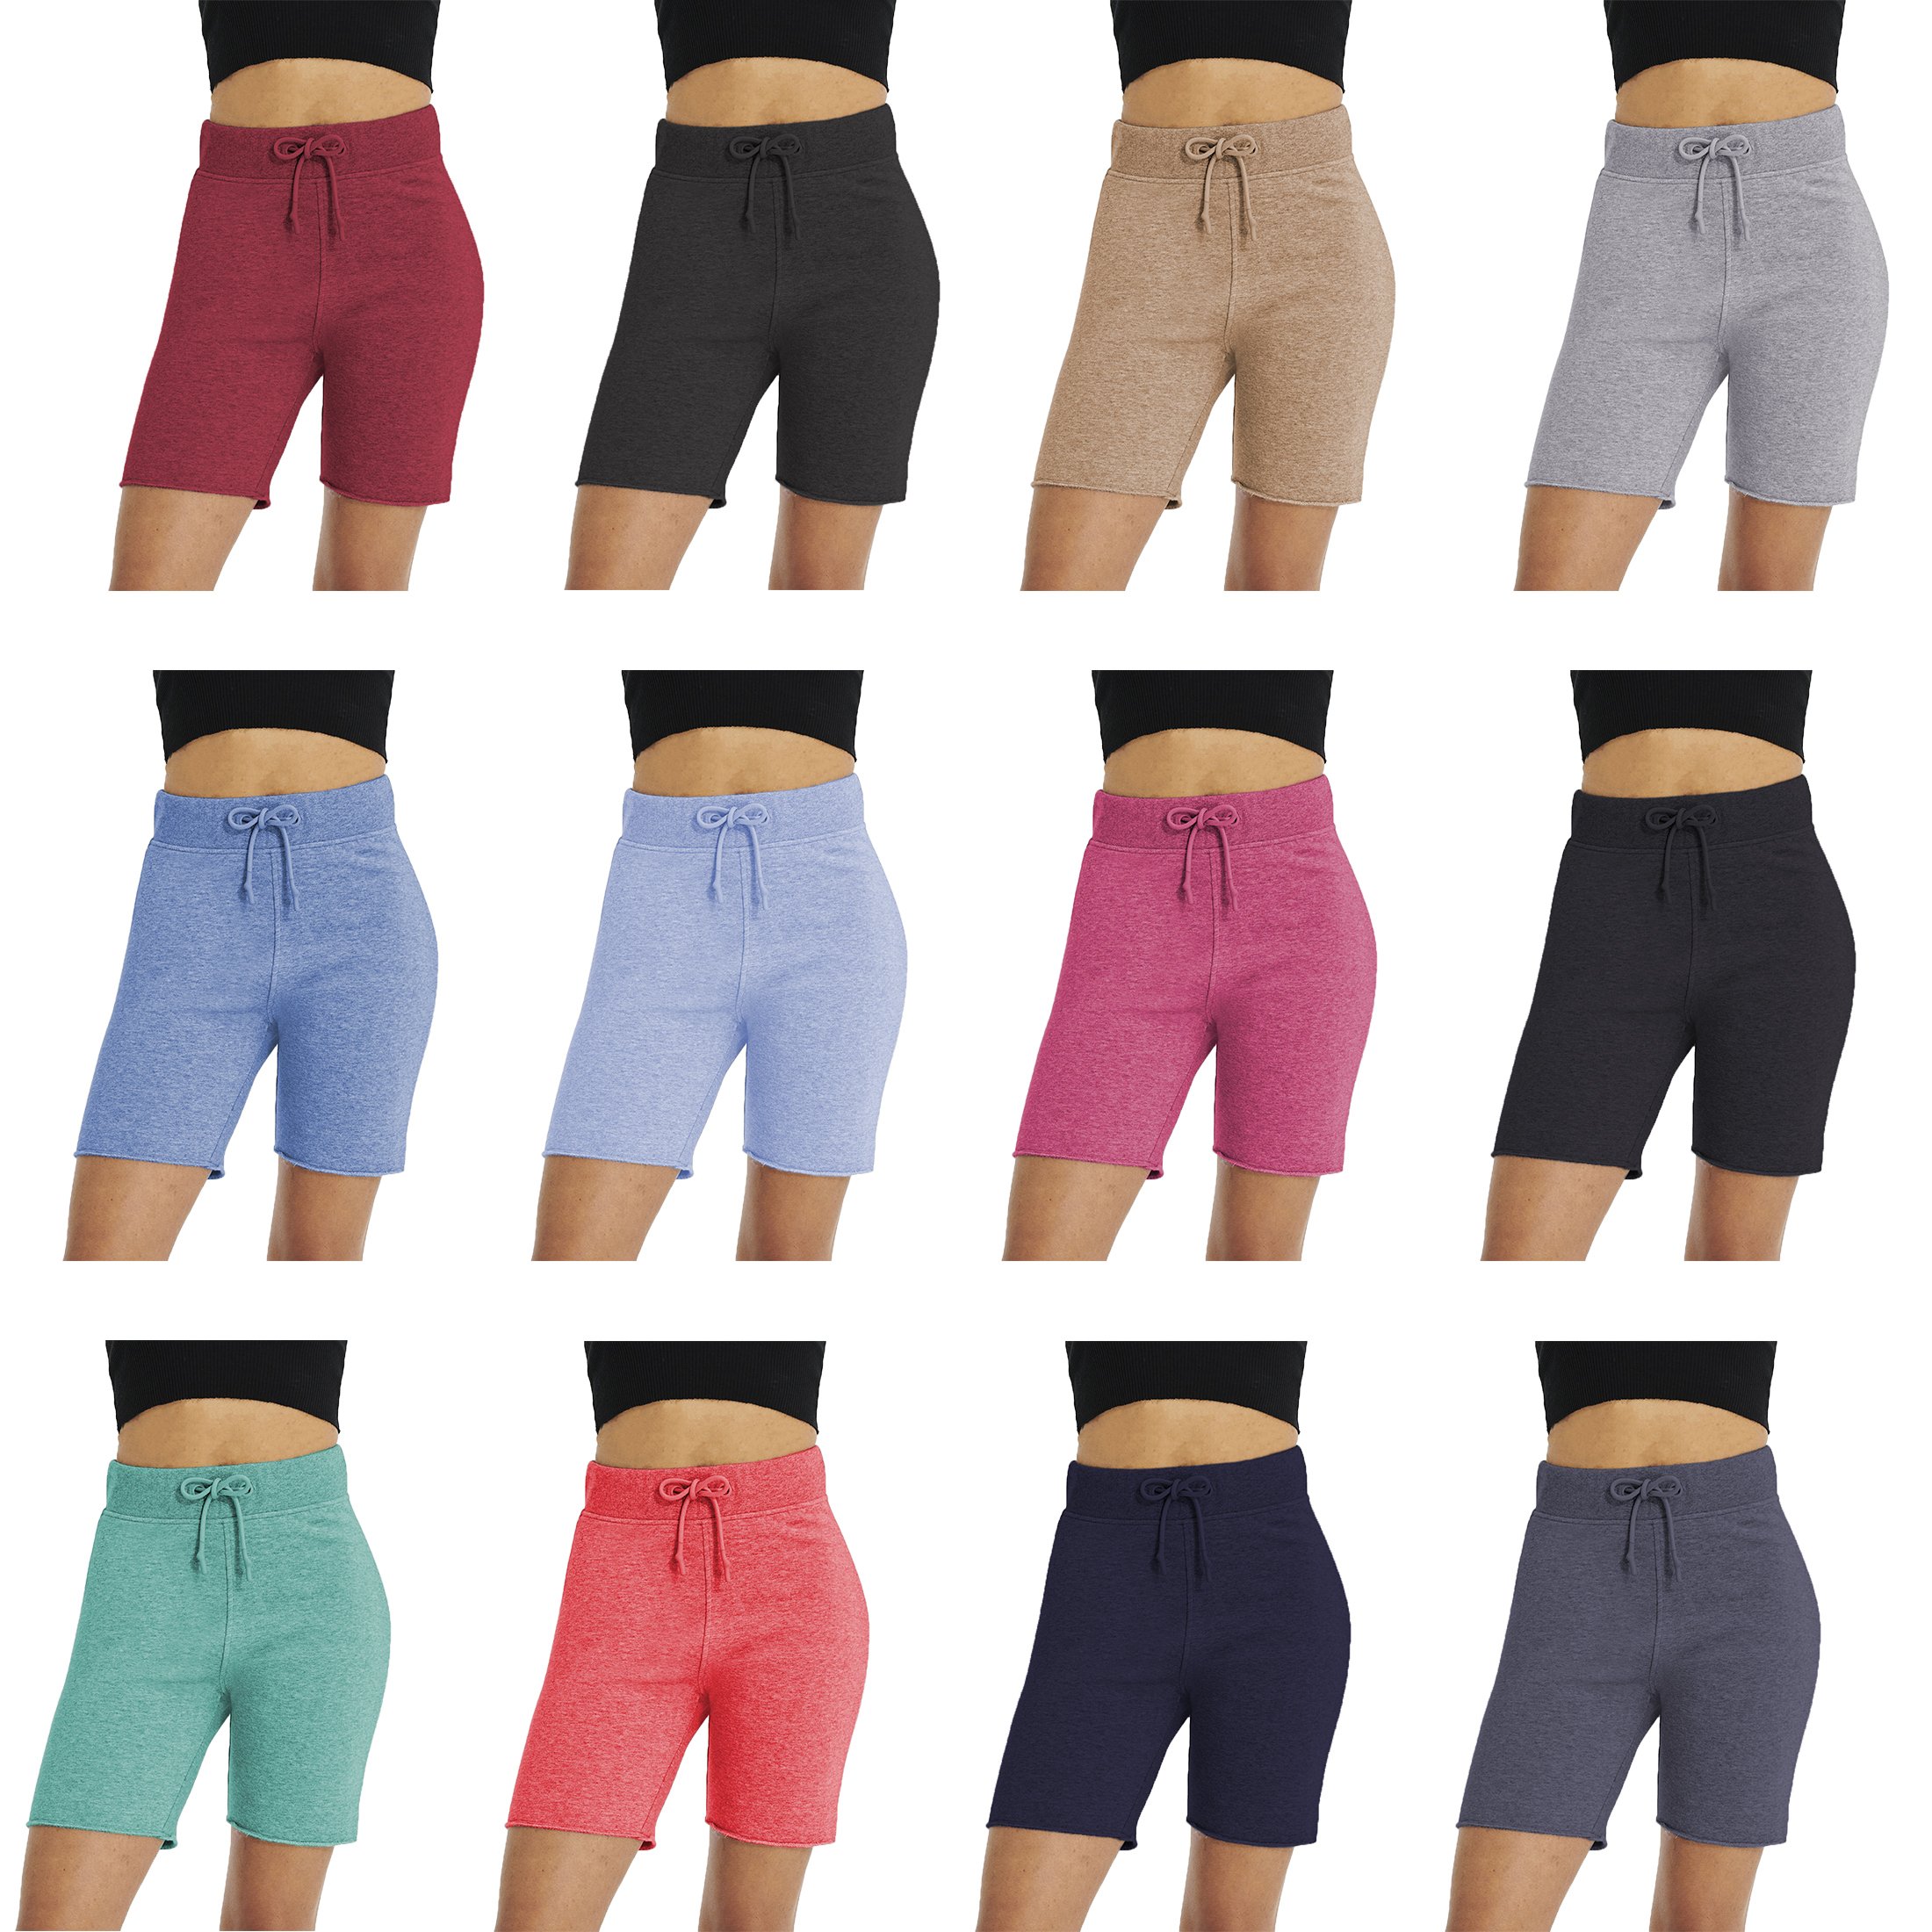 4-Pack Women’s Solid Summer Bermuda Shorts Soft Slim-Fit Stretchy Active Athletic Skinny Ladies Pants - M